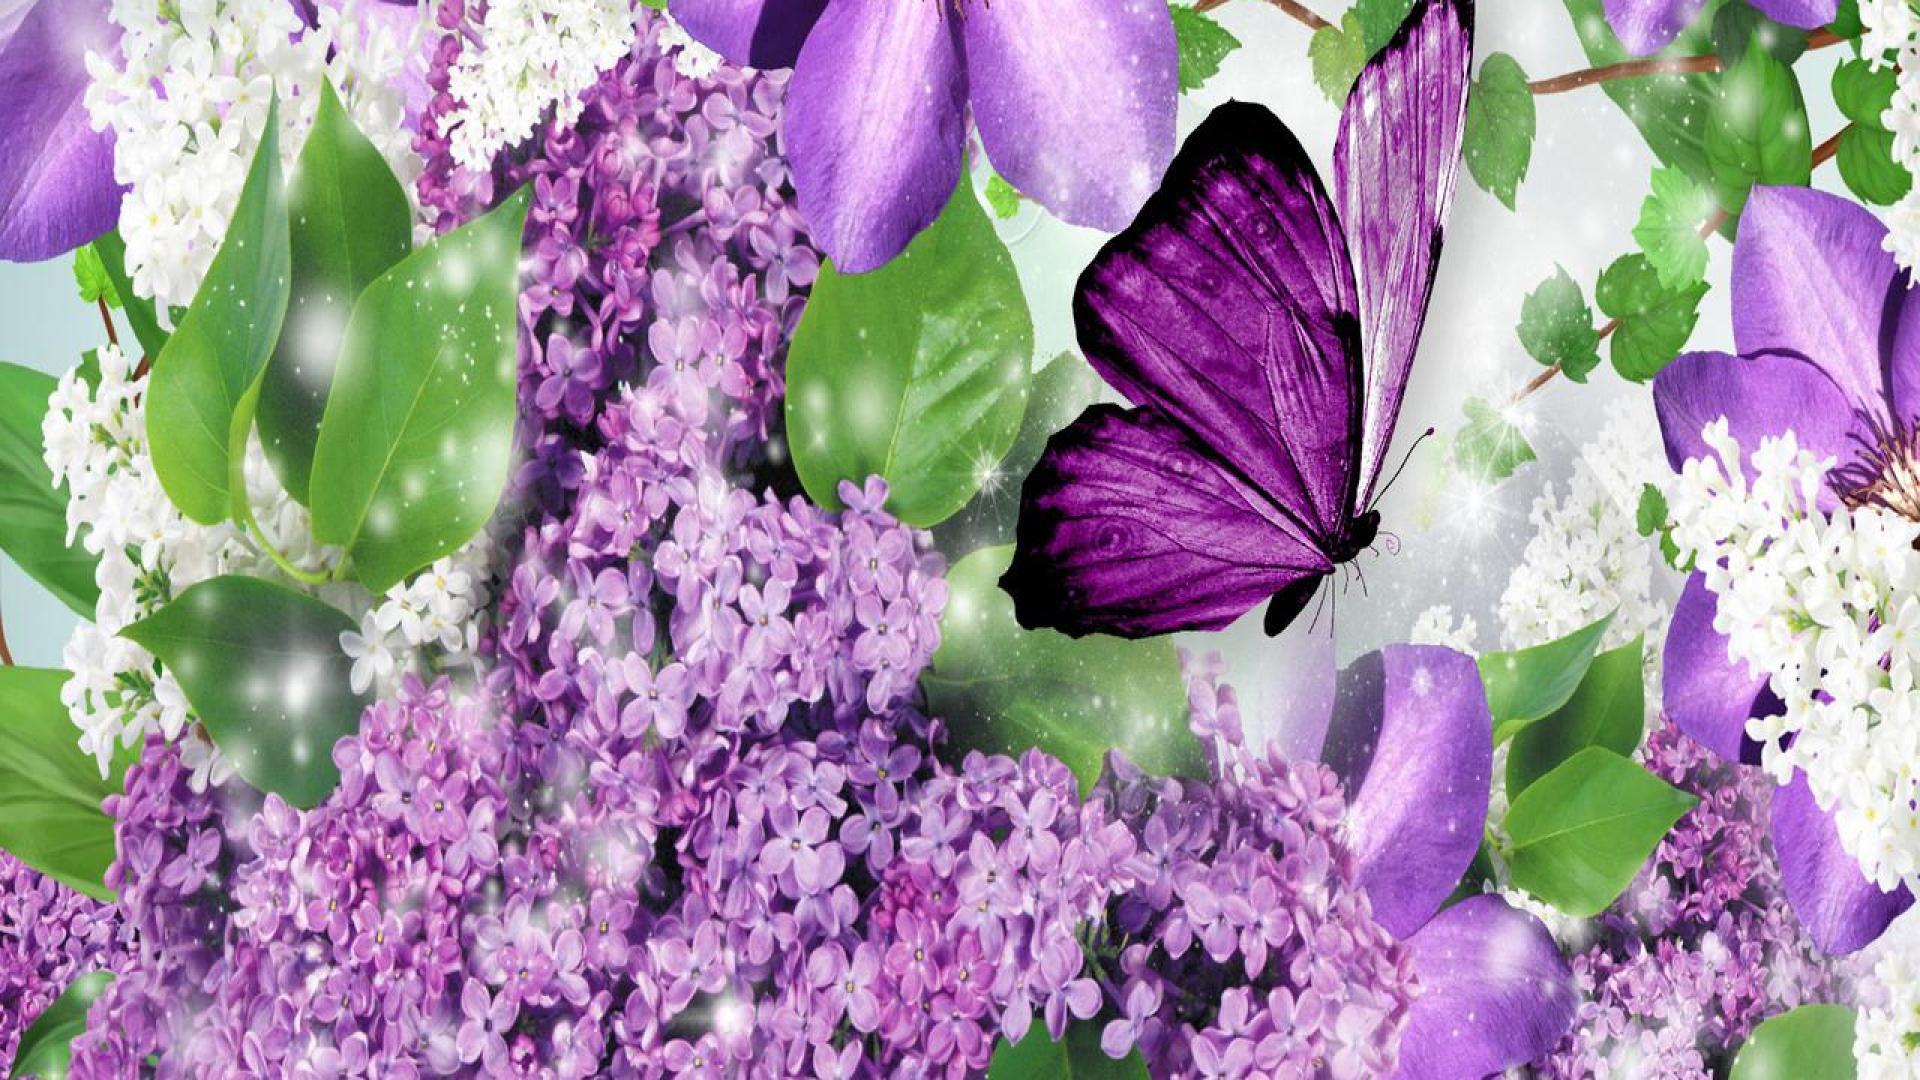 Charming butterfly wallpaper, image, pc download